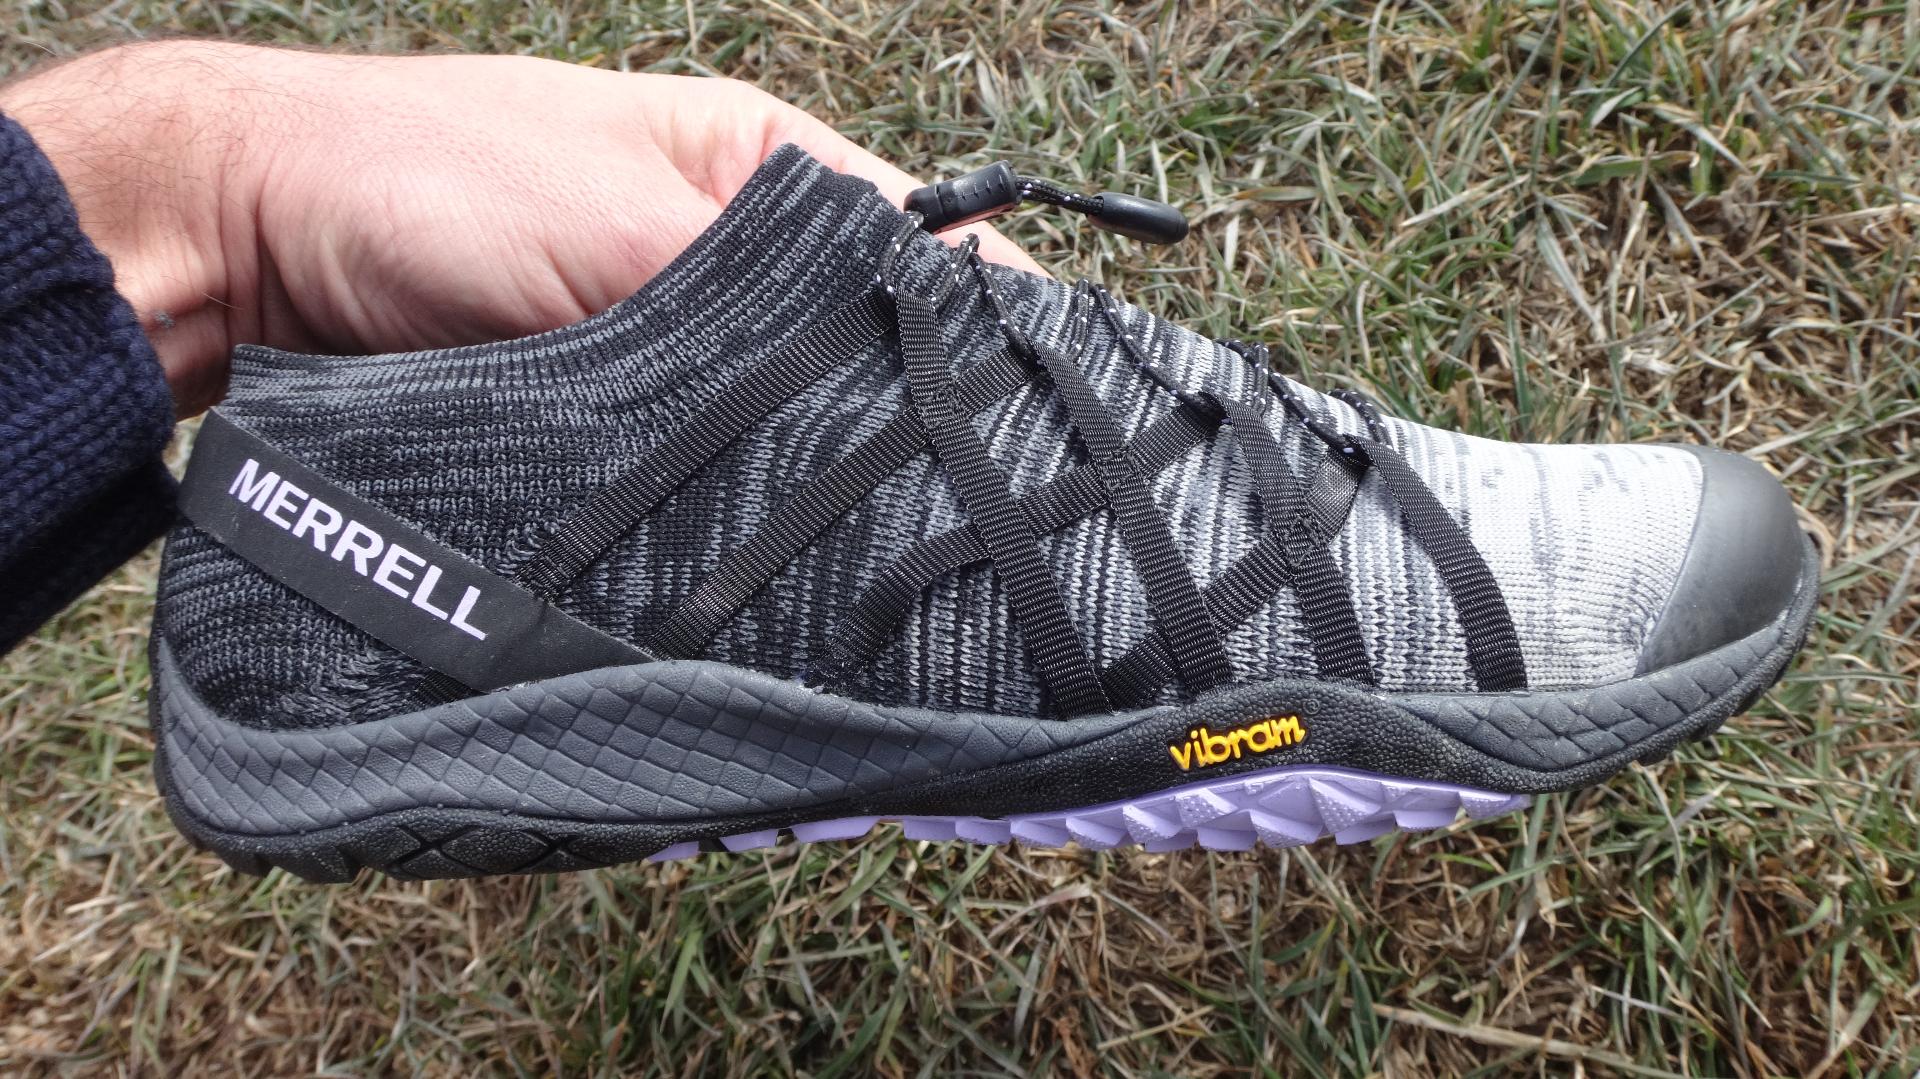 merrell trail glove review